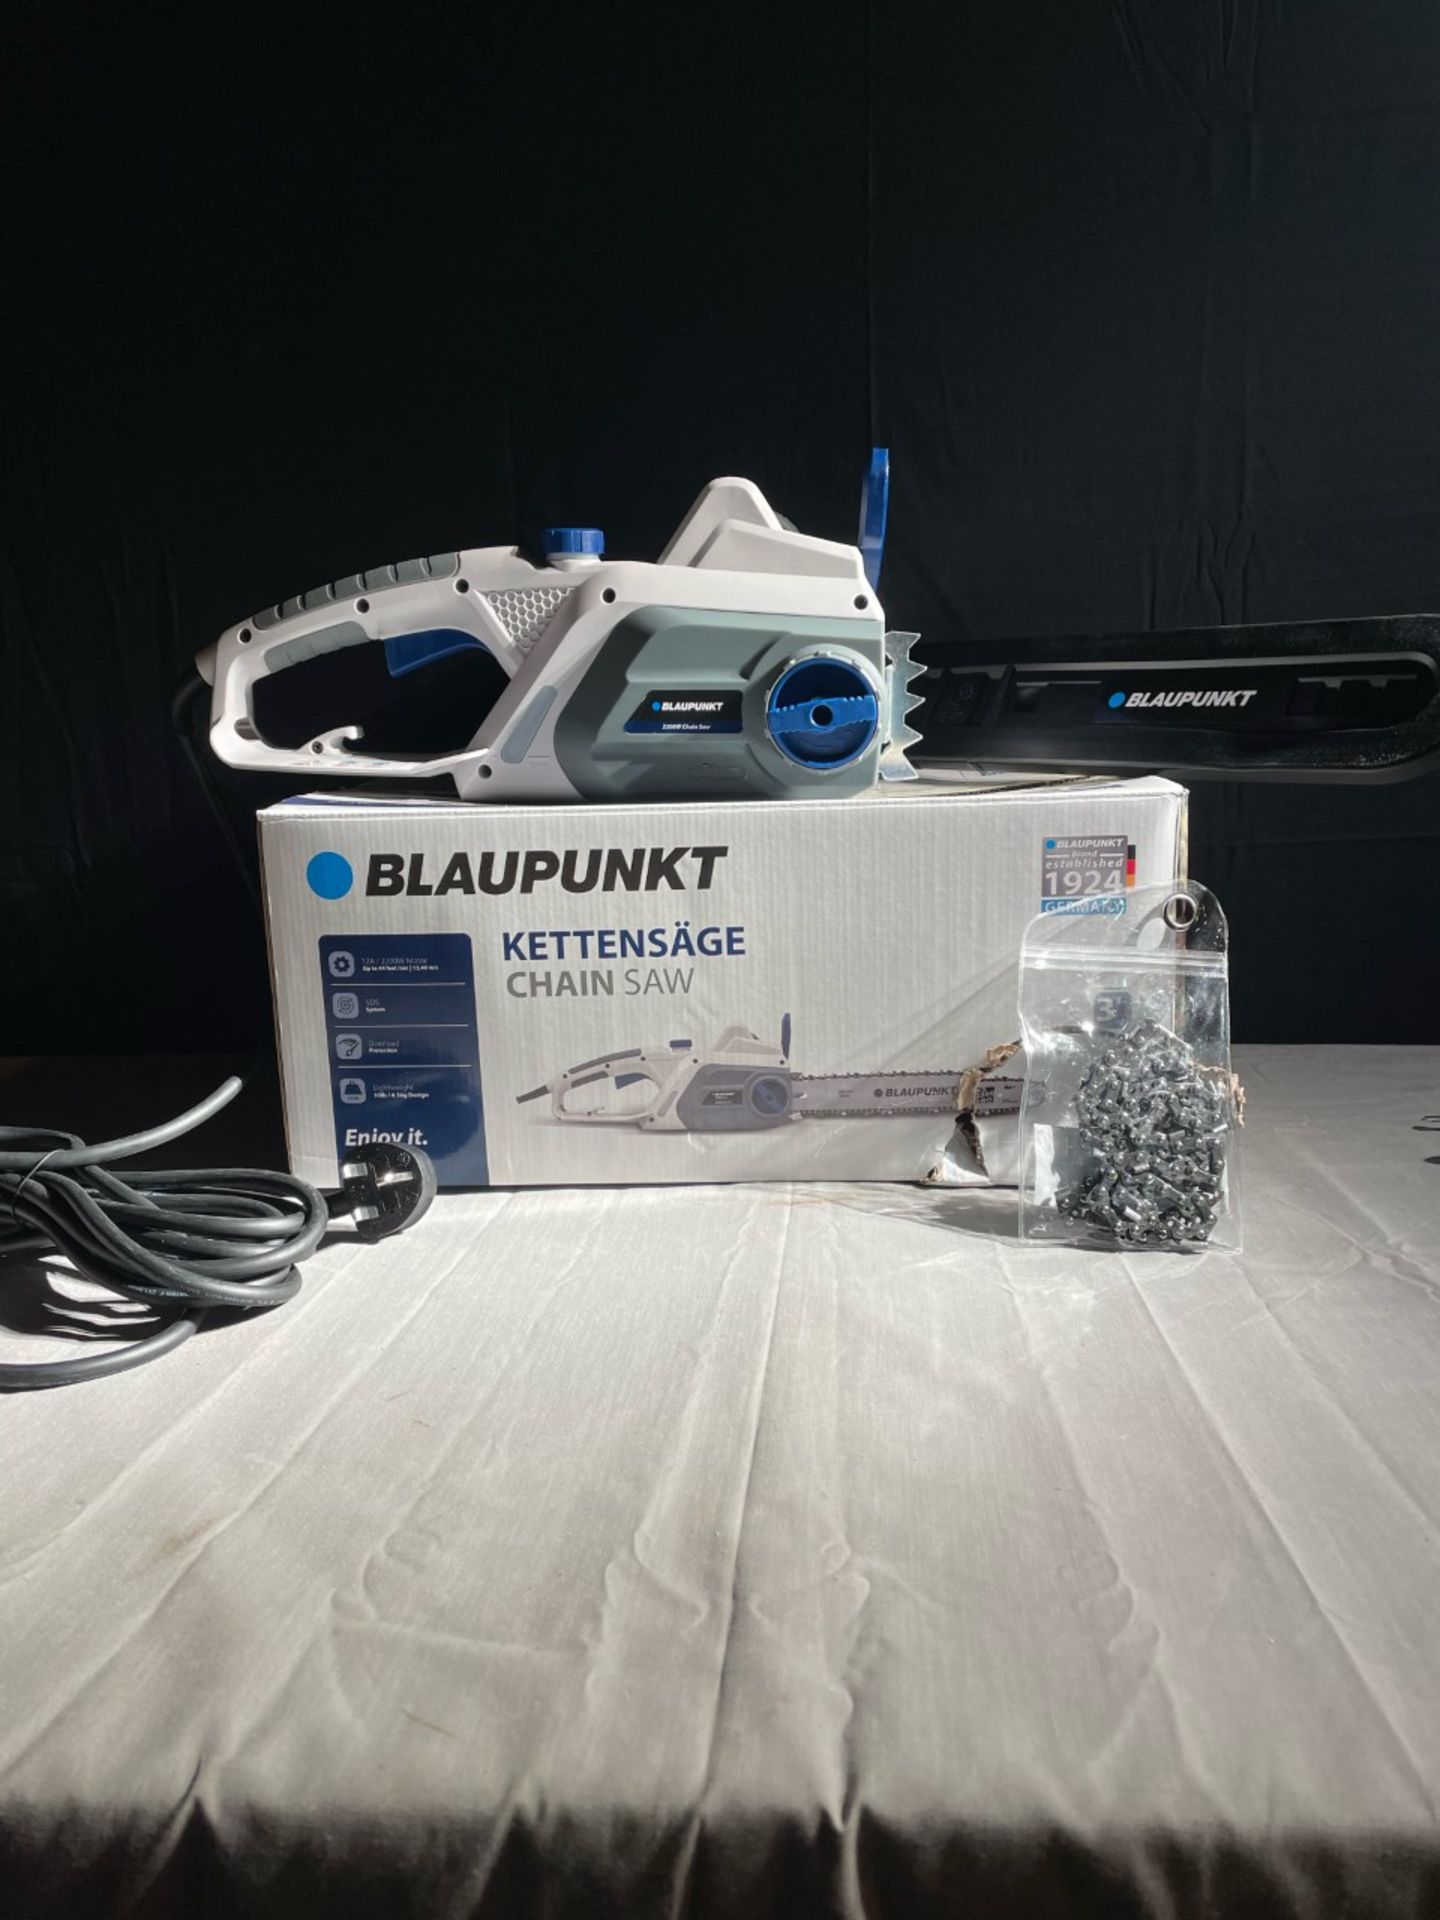 1x brand new in box Baupunkt CS3000 wired Chainsaw with a high powered 2200W motor. Low